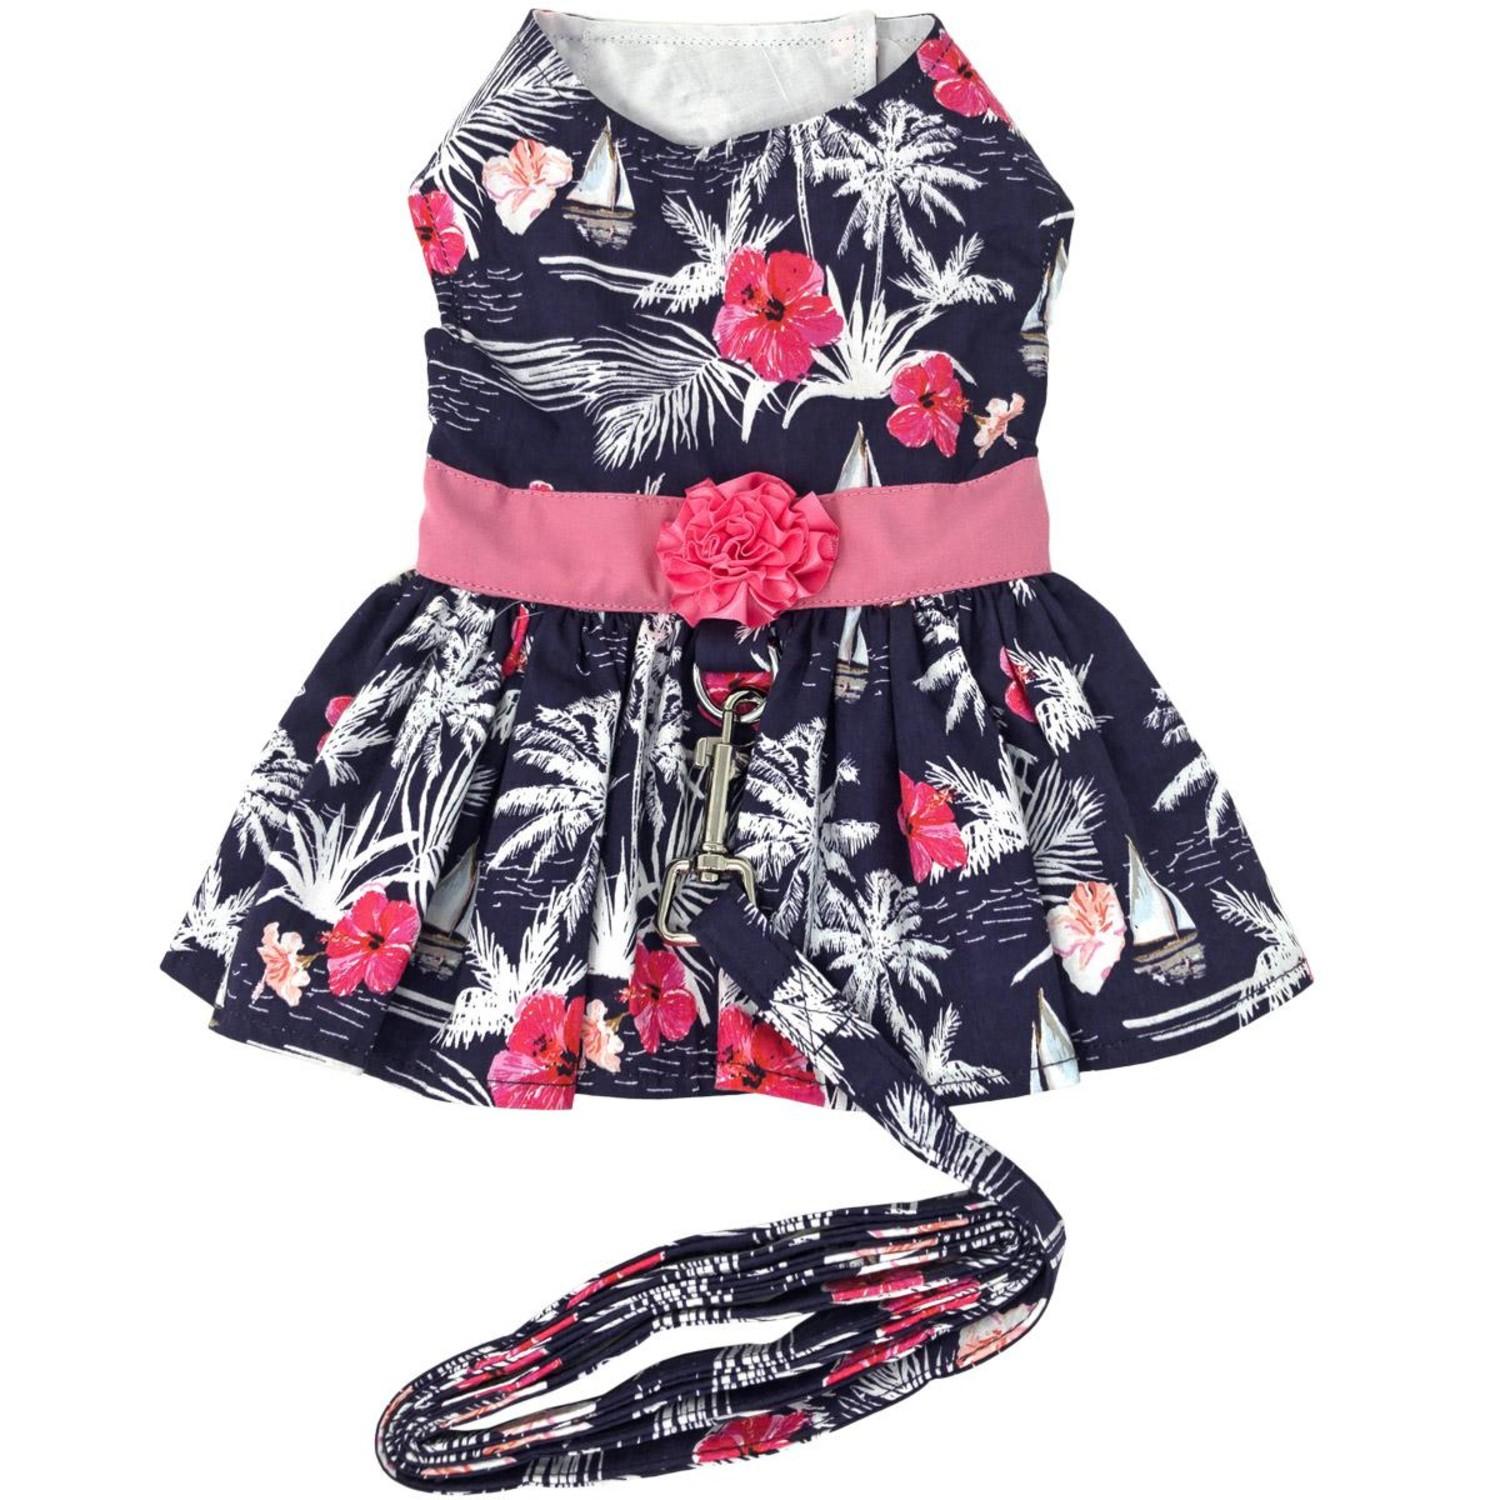 Moonlight Sails Dog Harness Dress with Leash by Doggie Design